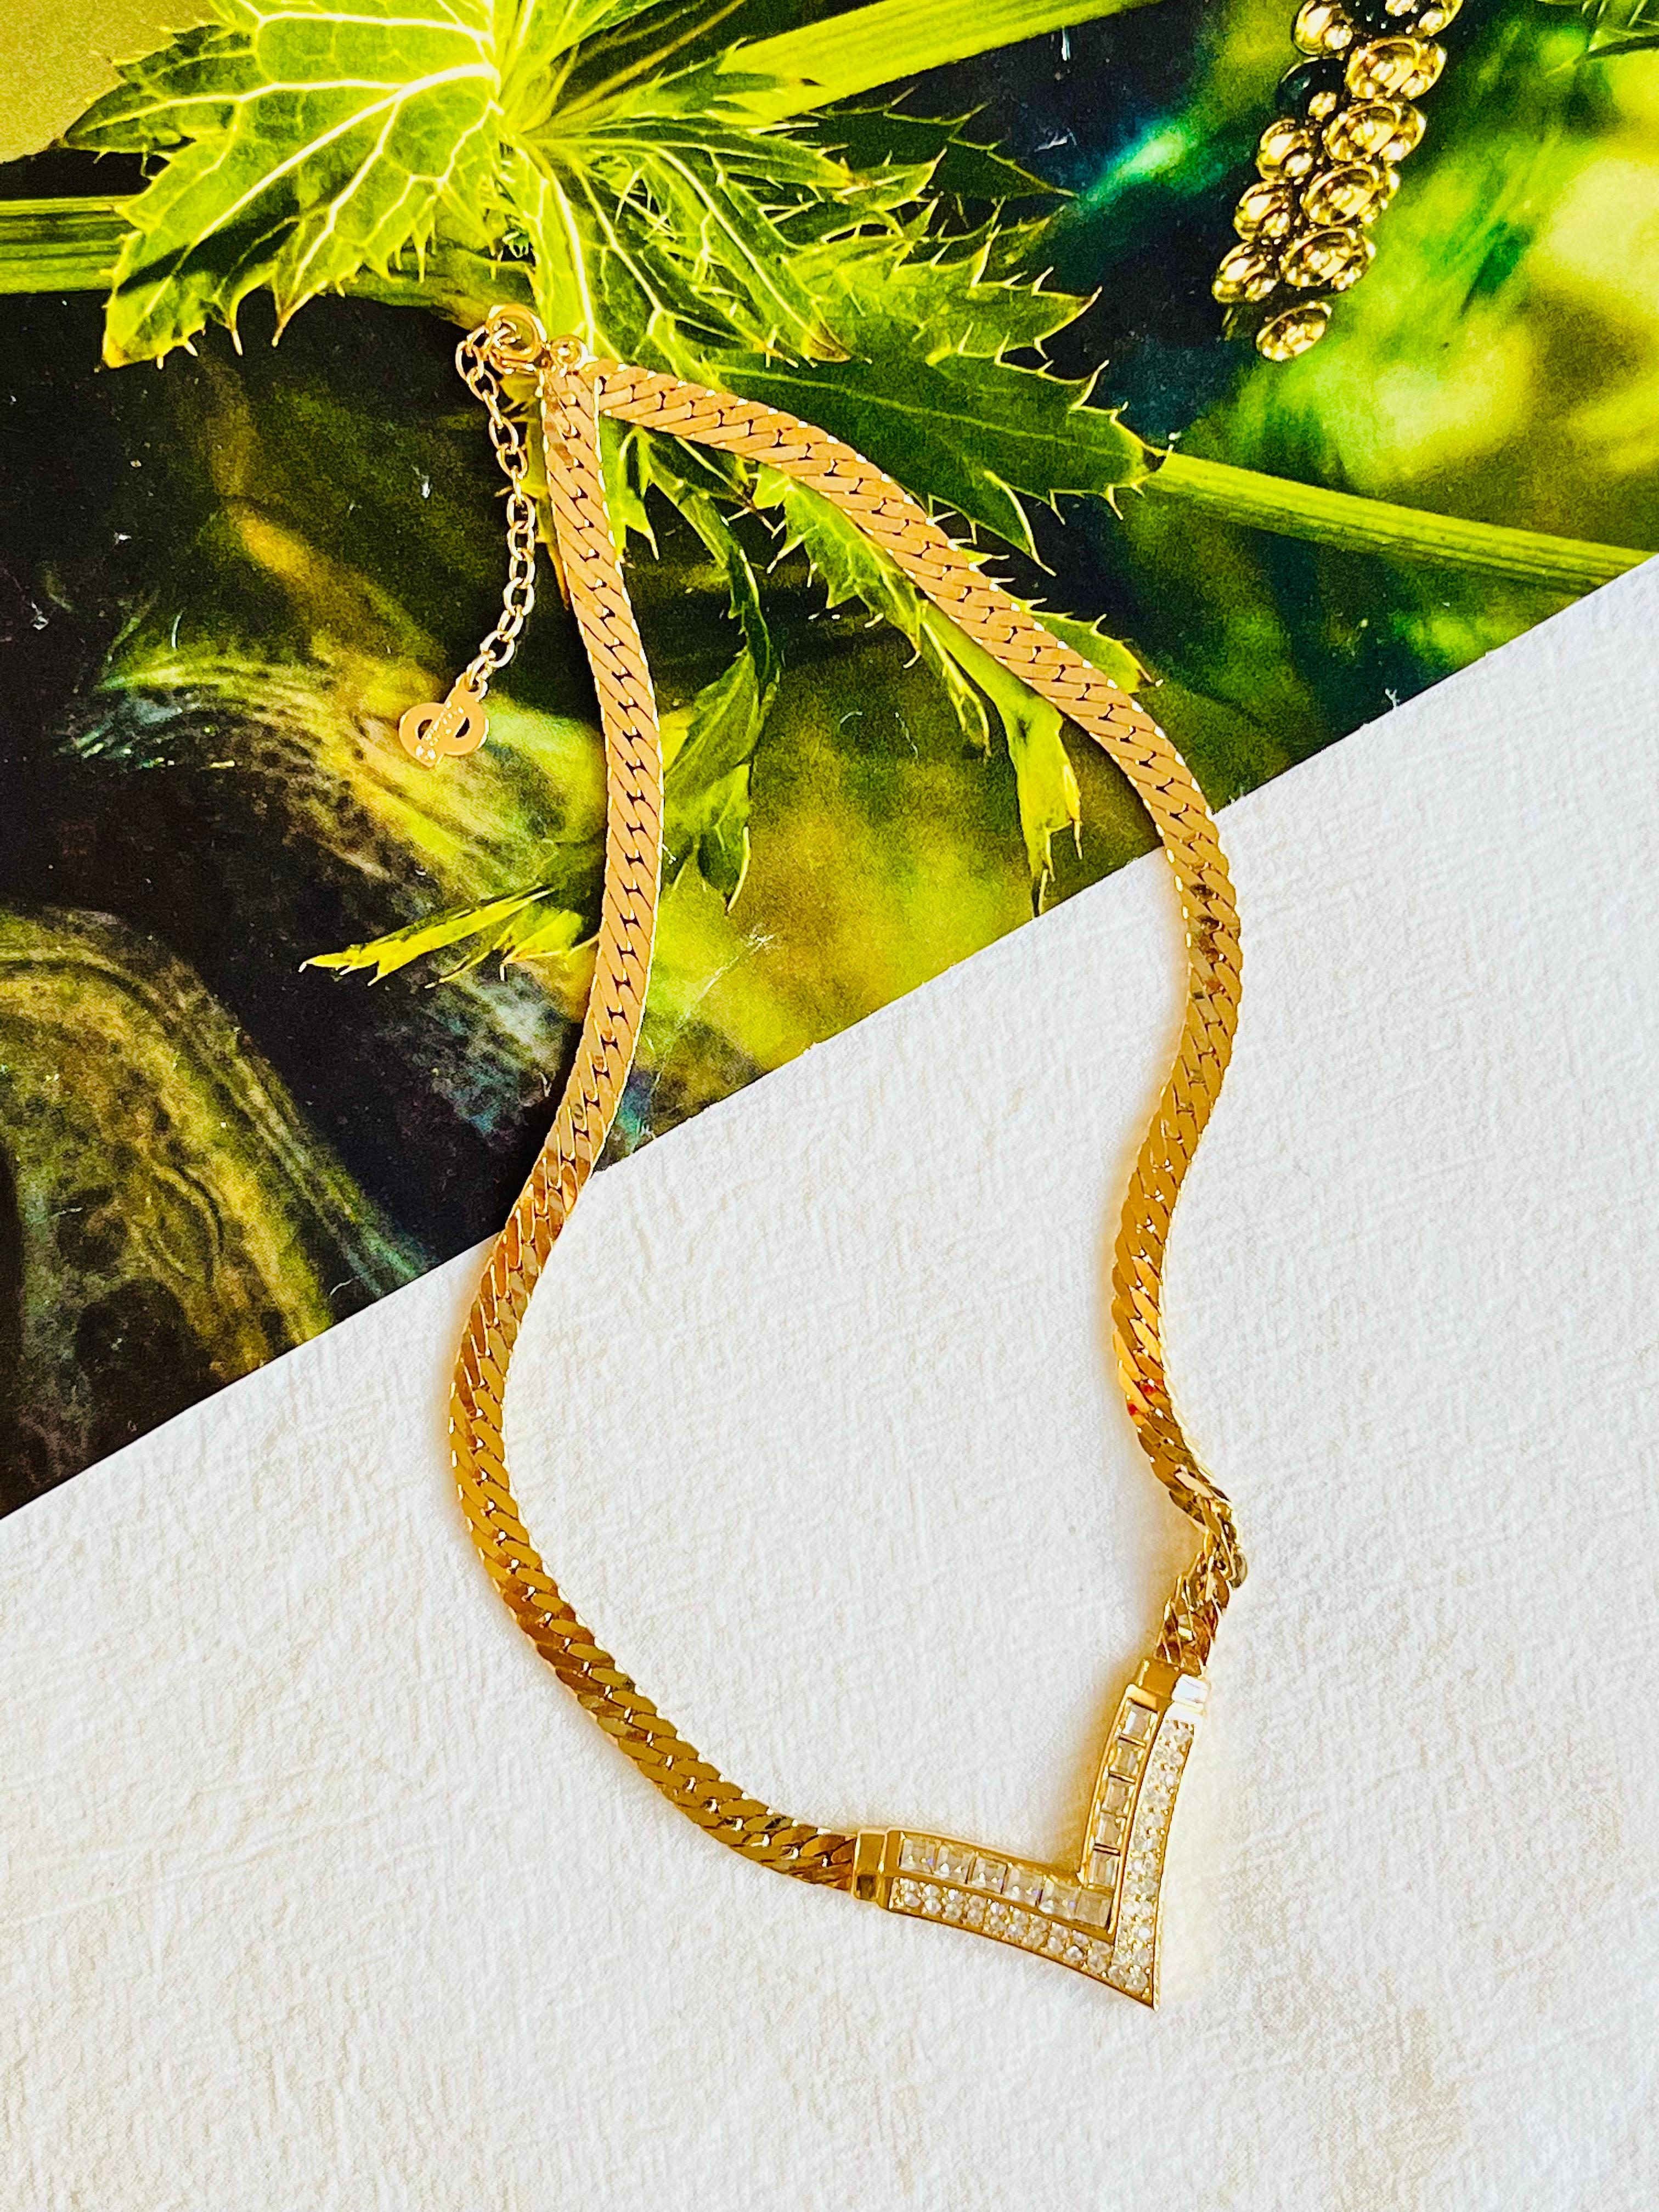 Very excellent condition. 100% Genuine.

Not any scratches, or colour loss. Marked 'Chr.Dior (C) '.

It is around 50 years old. This is a very stylish and rare piece of jewellery.

Length: 34 cm. Extend chain: 6 cm. Pendant: 4.0*3.0 cm.

Weight: 26